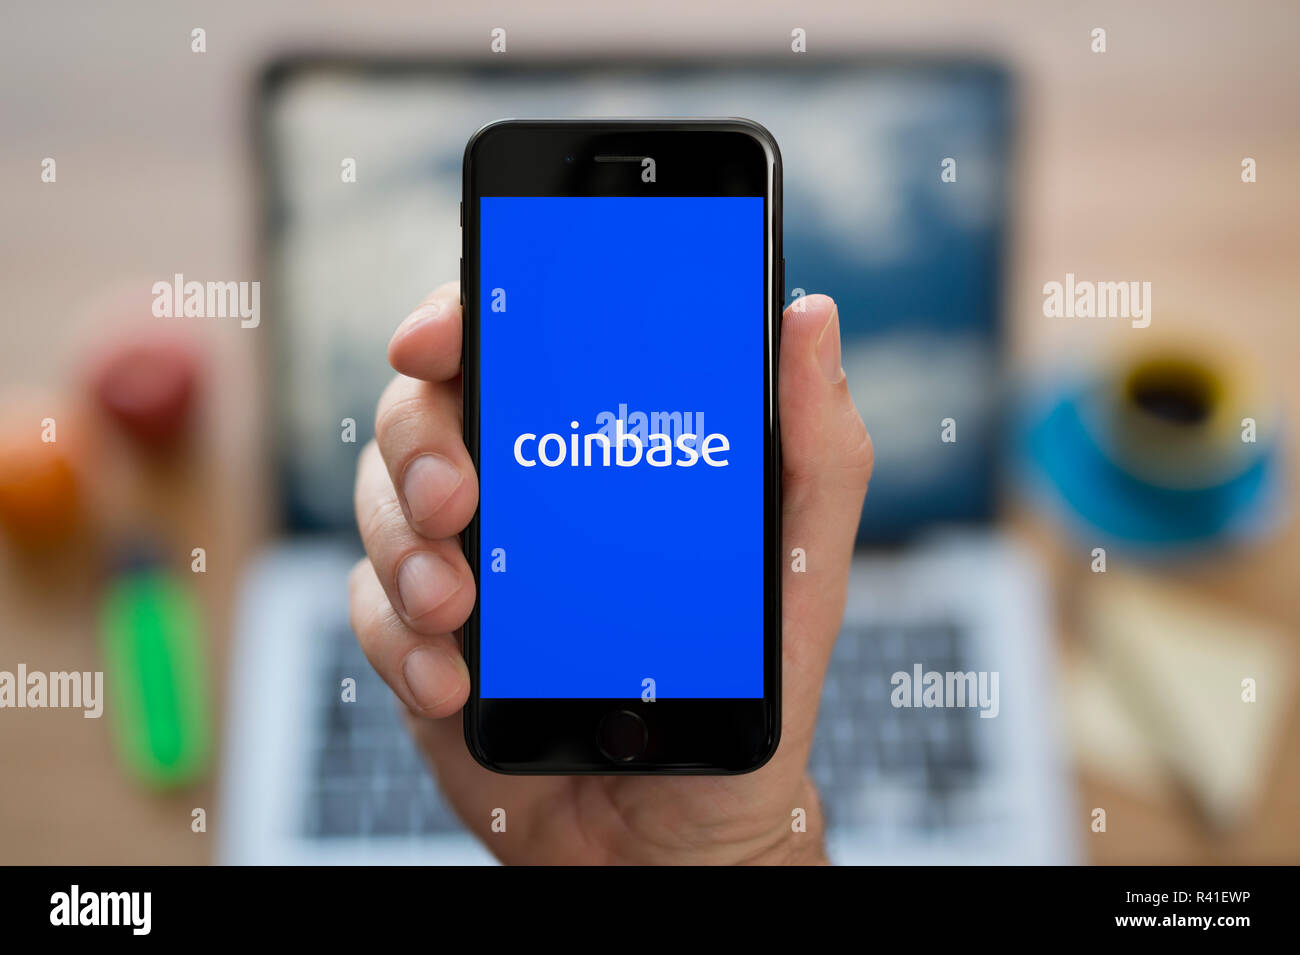 A man looks at his iPhone which displays the Coinbase logo, while sat at his computer desk (Editorial use only). Stock Photo